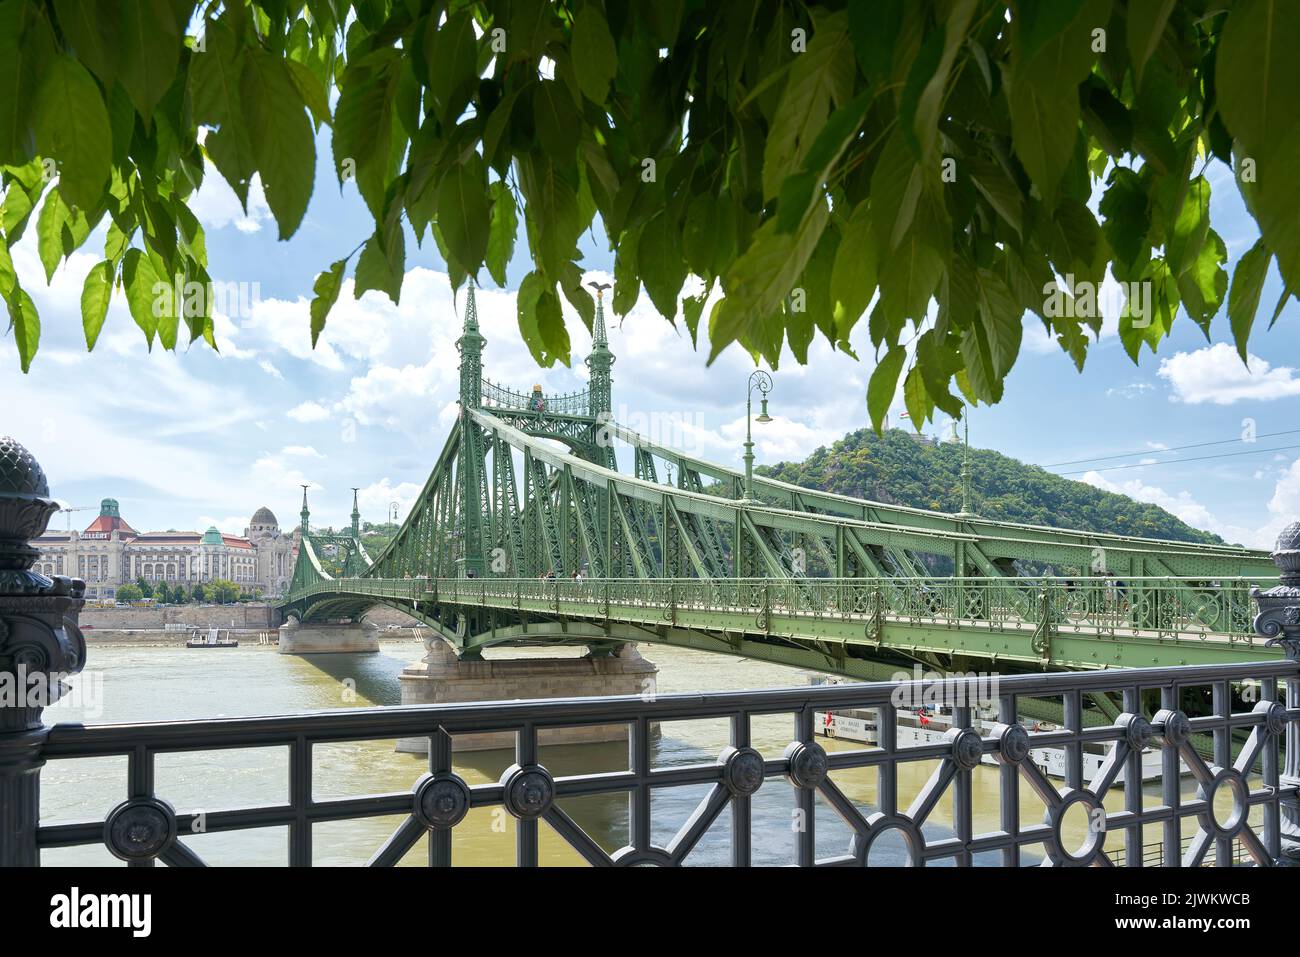 The historic Freedom Bridge, Szabadsag hid, in Budapest crosses the Danube River and connects the districts of Buda and Pest Stock Photo